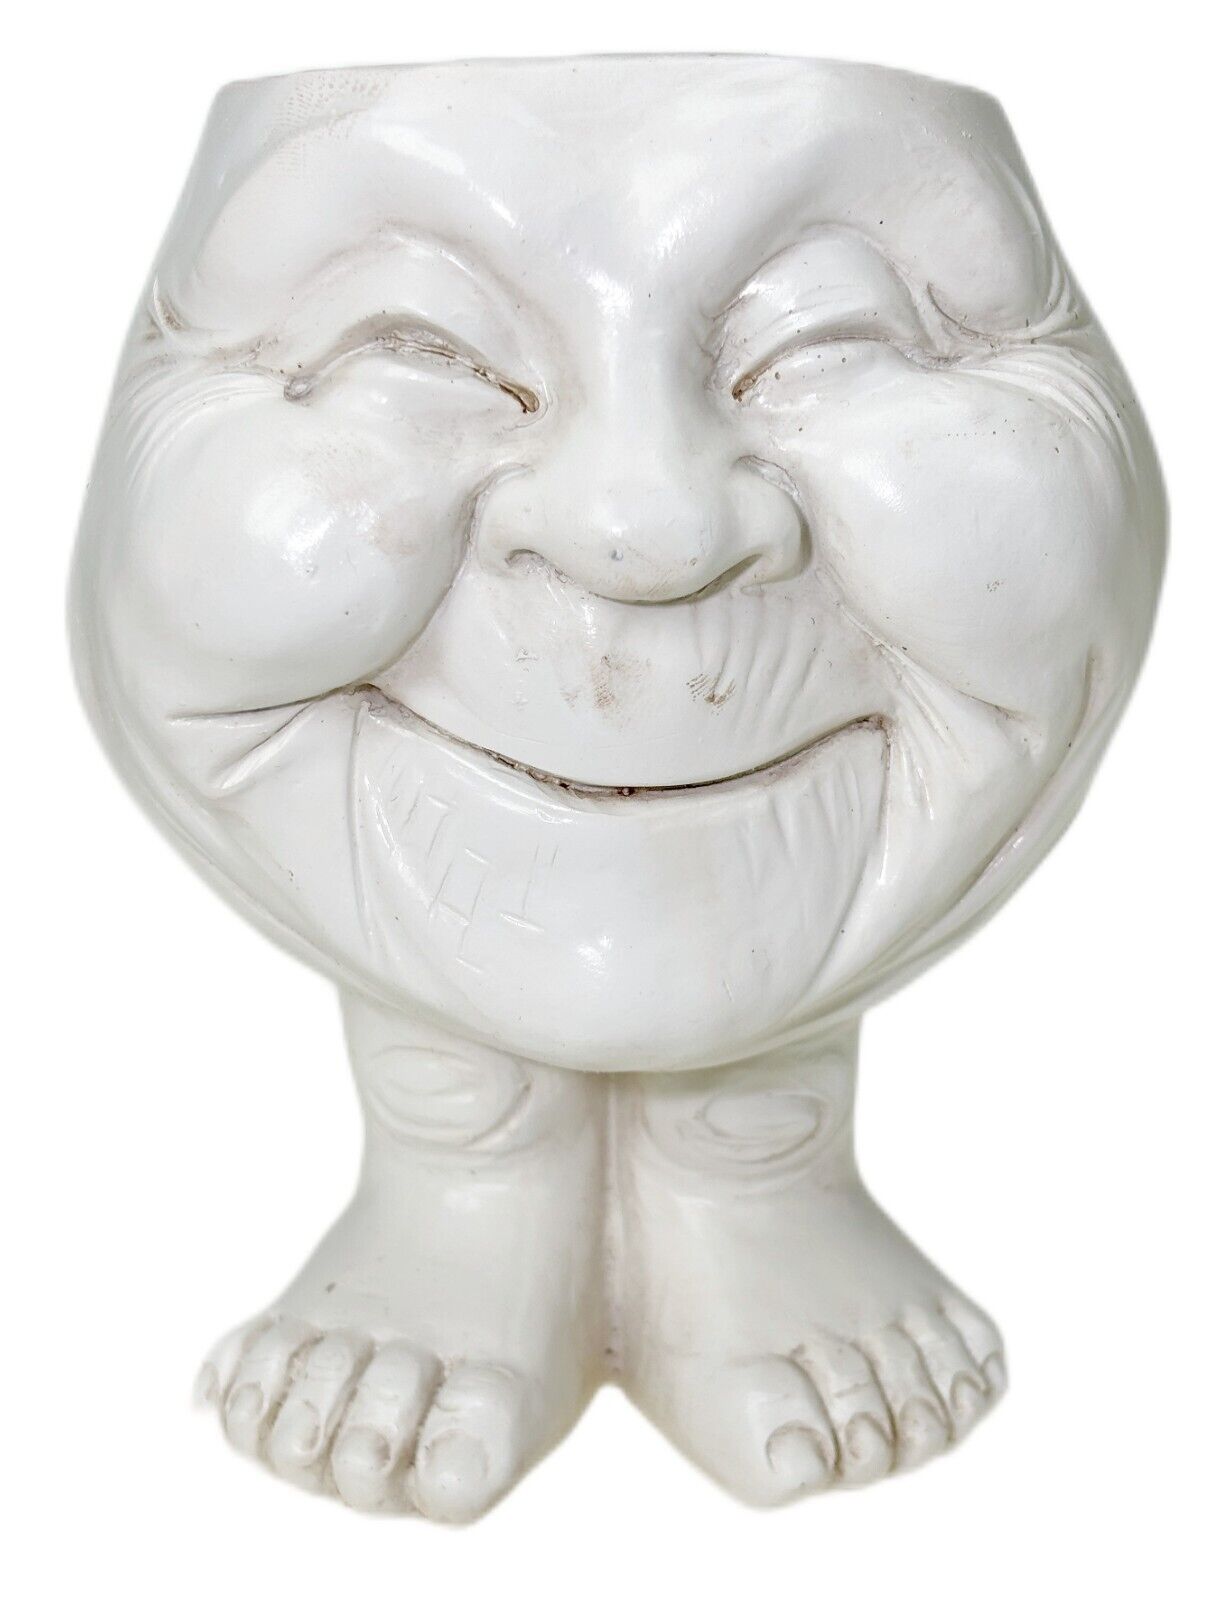 6” Smiling Muggly Face Granny Pot Dry Flower Vase Footed